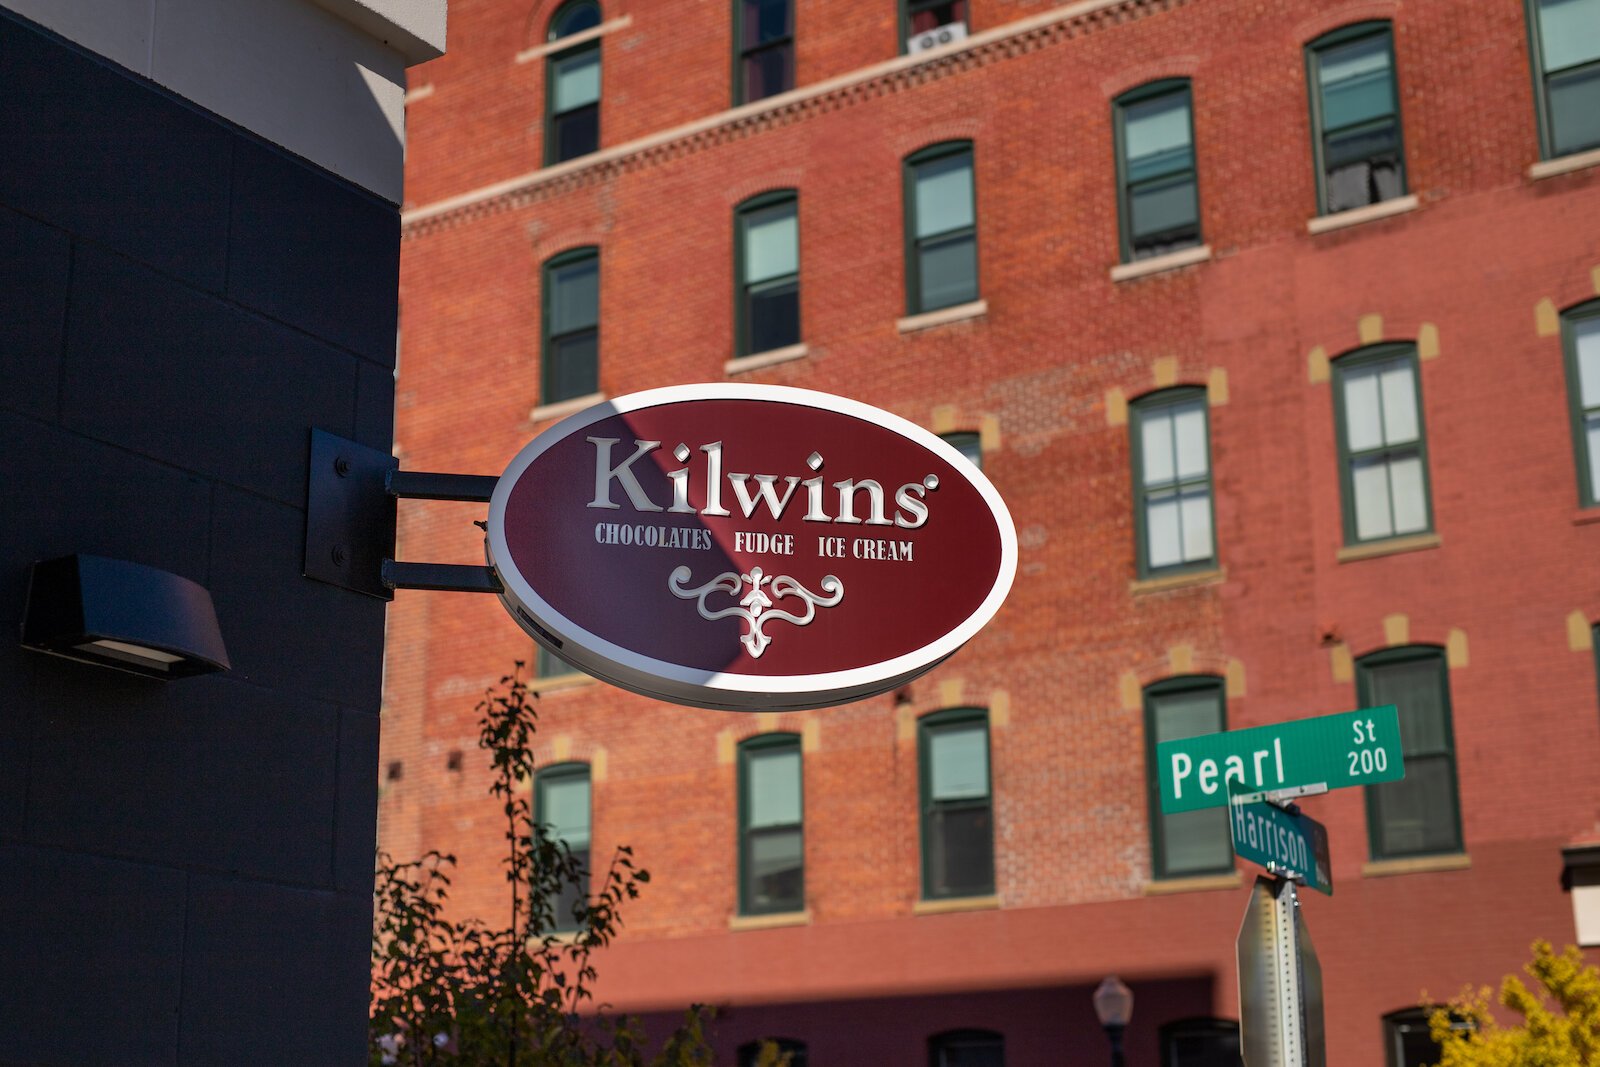 Kilwins Chocolates is the ground floor of The Bradley hotel in Downtown Fort Wayne.